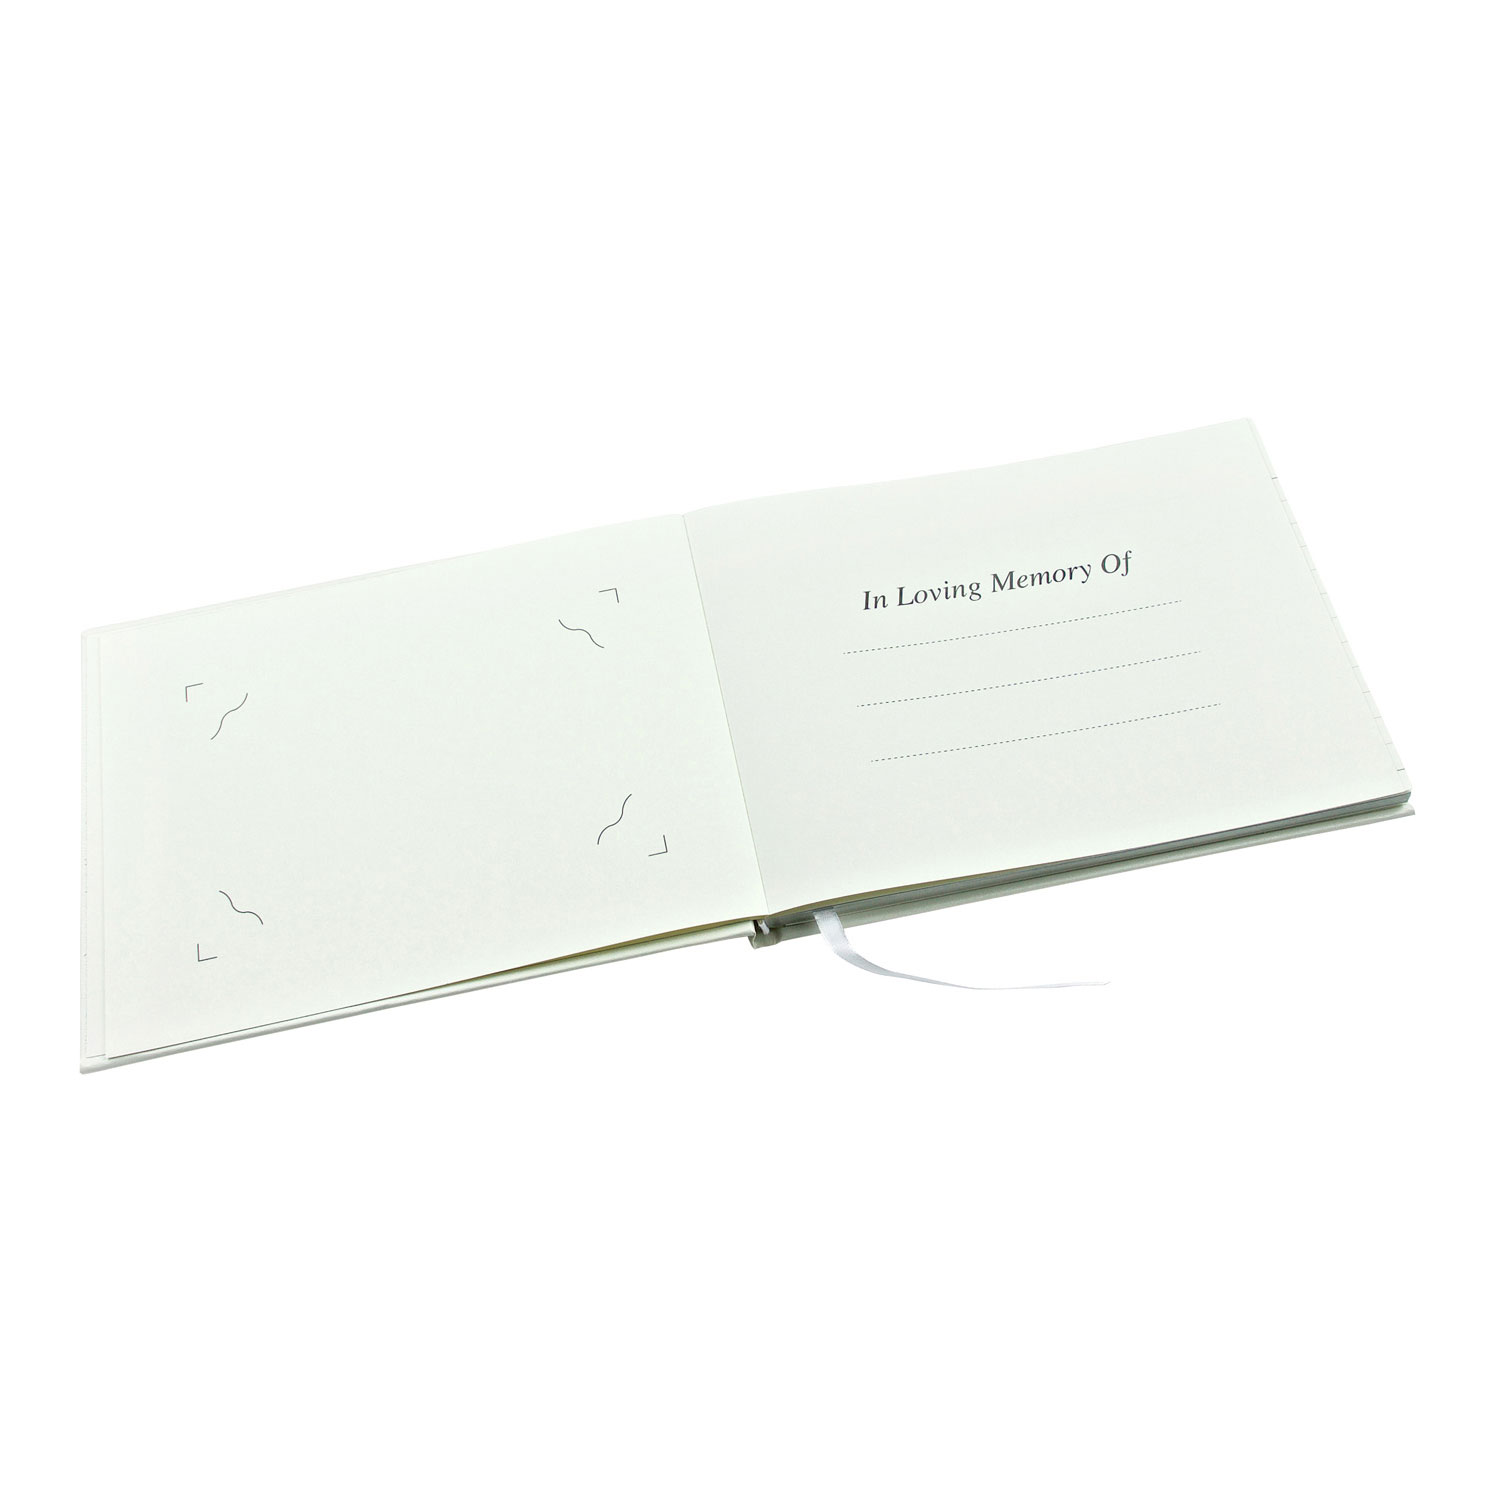 Open Format Inner Pages White - 8.9 x 6.7 x 1.2 inches Condolence Book Funeral Guest Book Esposti Celebration of Life